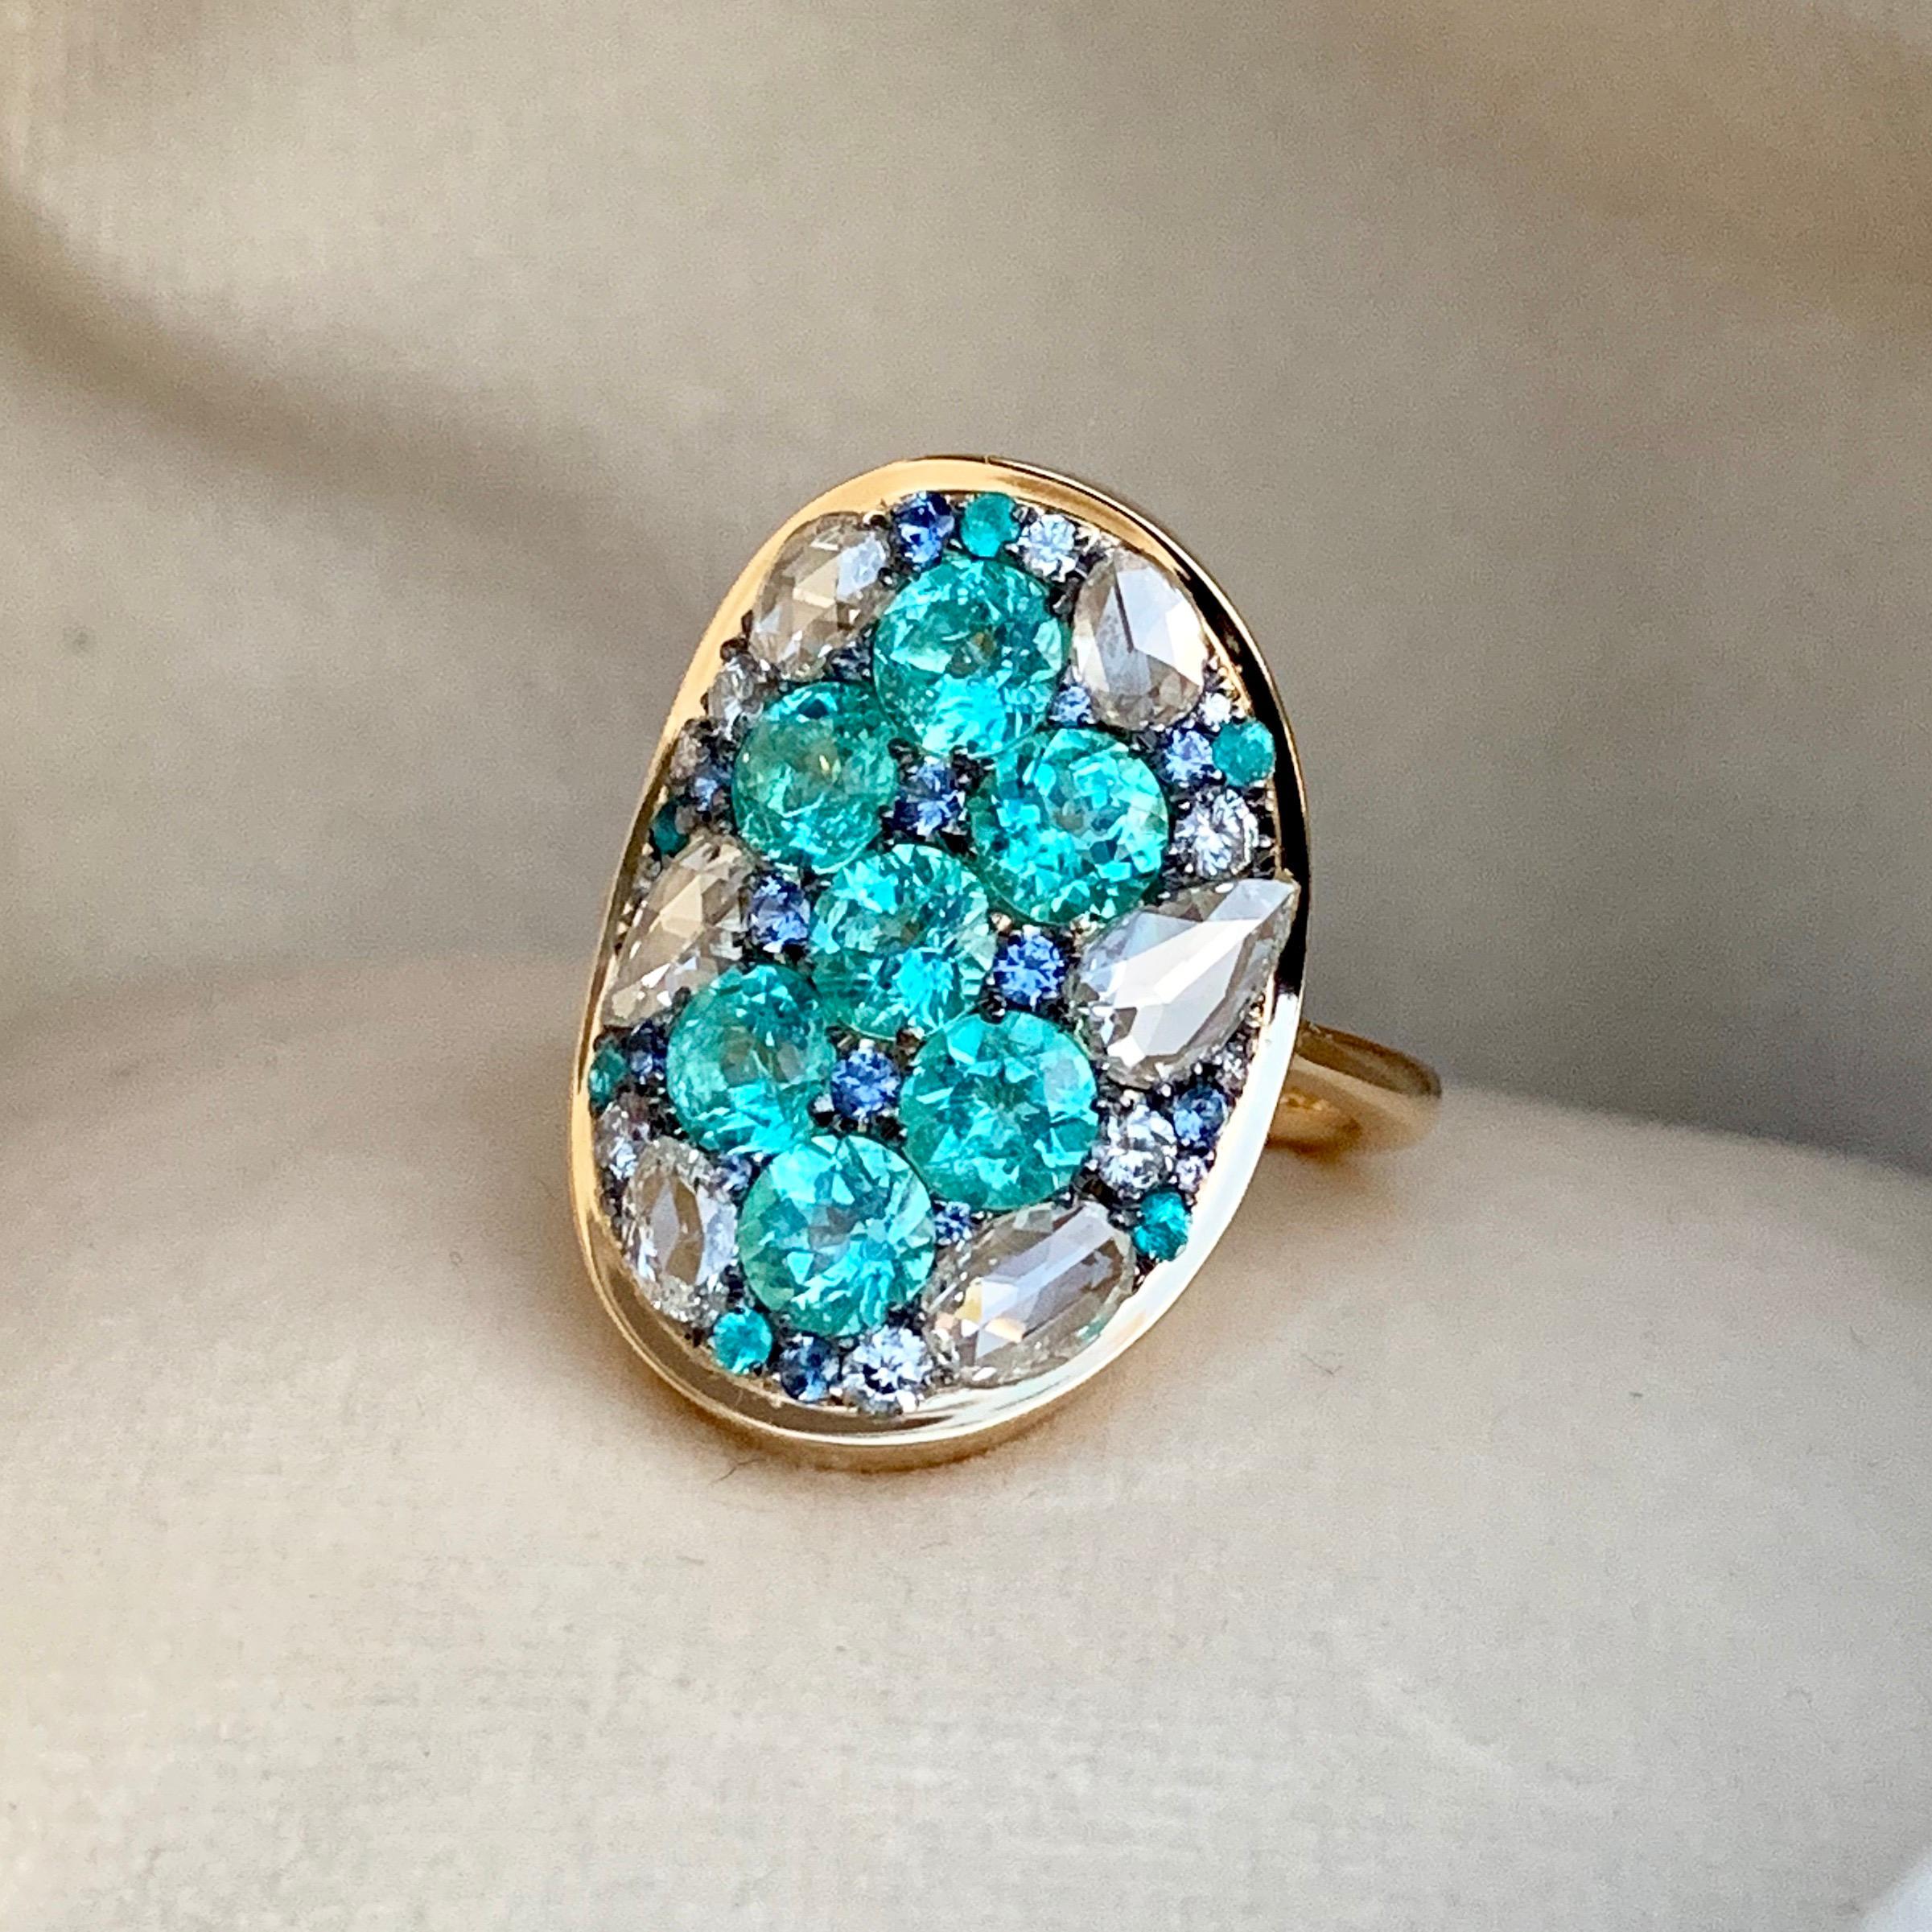 One of a kind ring handmade in Belgium from jewellery designer Joke Quick, in 18K yellow gold 9,6 g & blackened sterling silver (The stones are set on silver to create a black background for the stones). Pave set with paraiba tourmalines 2,84 ct. ,